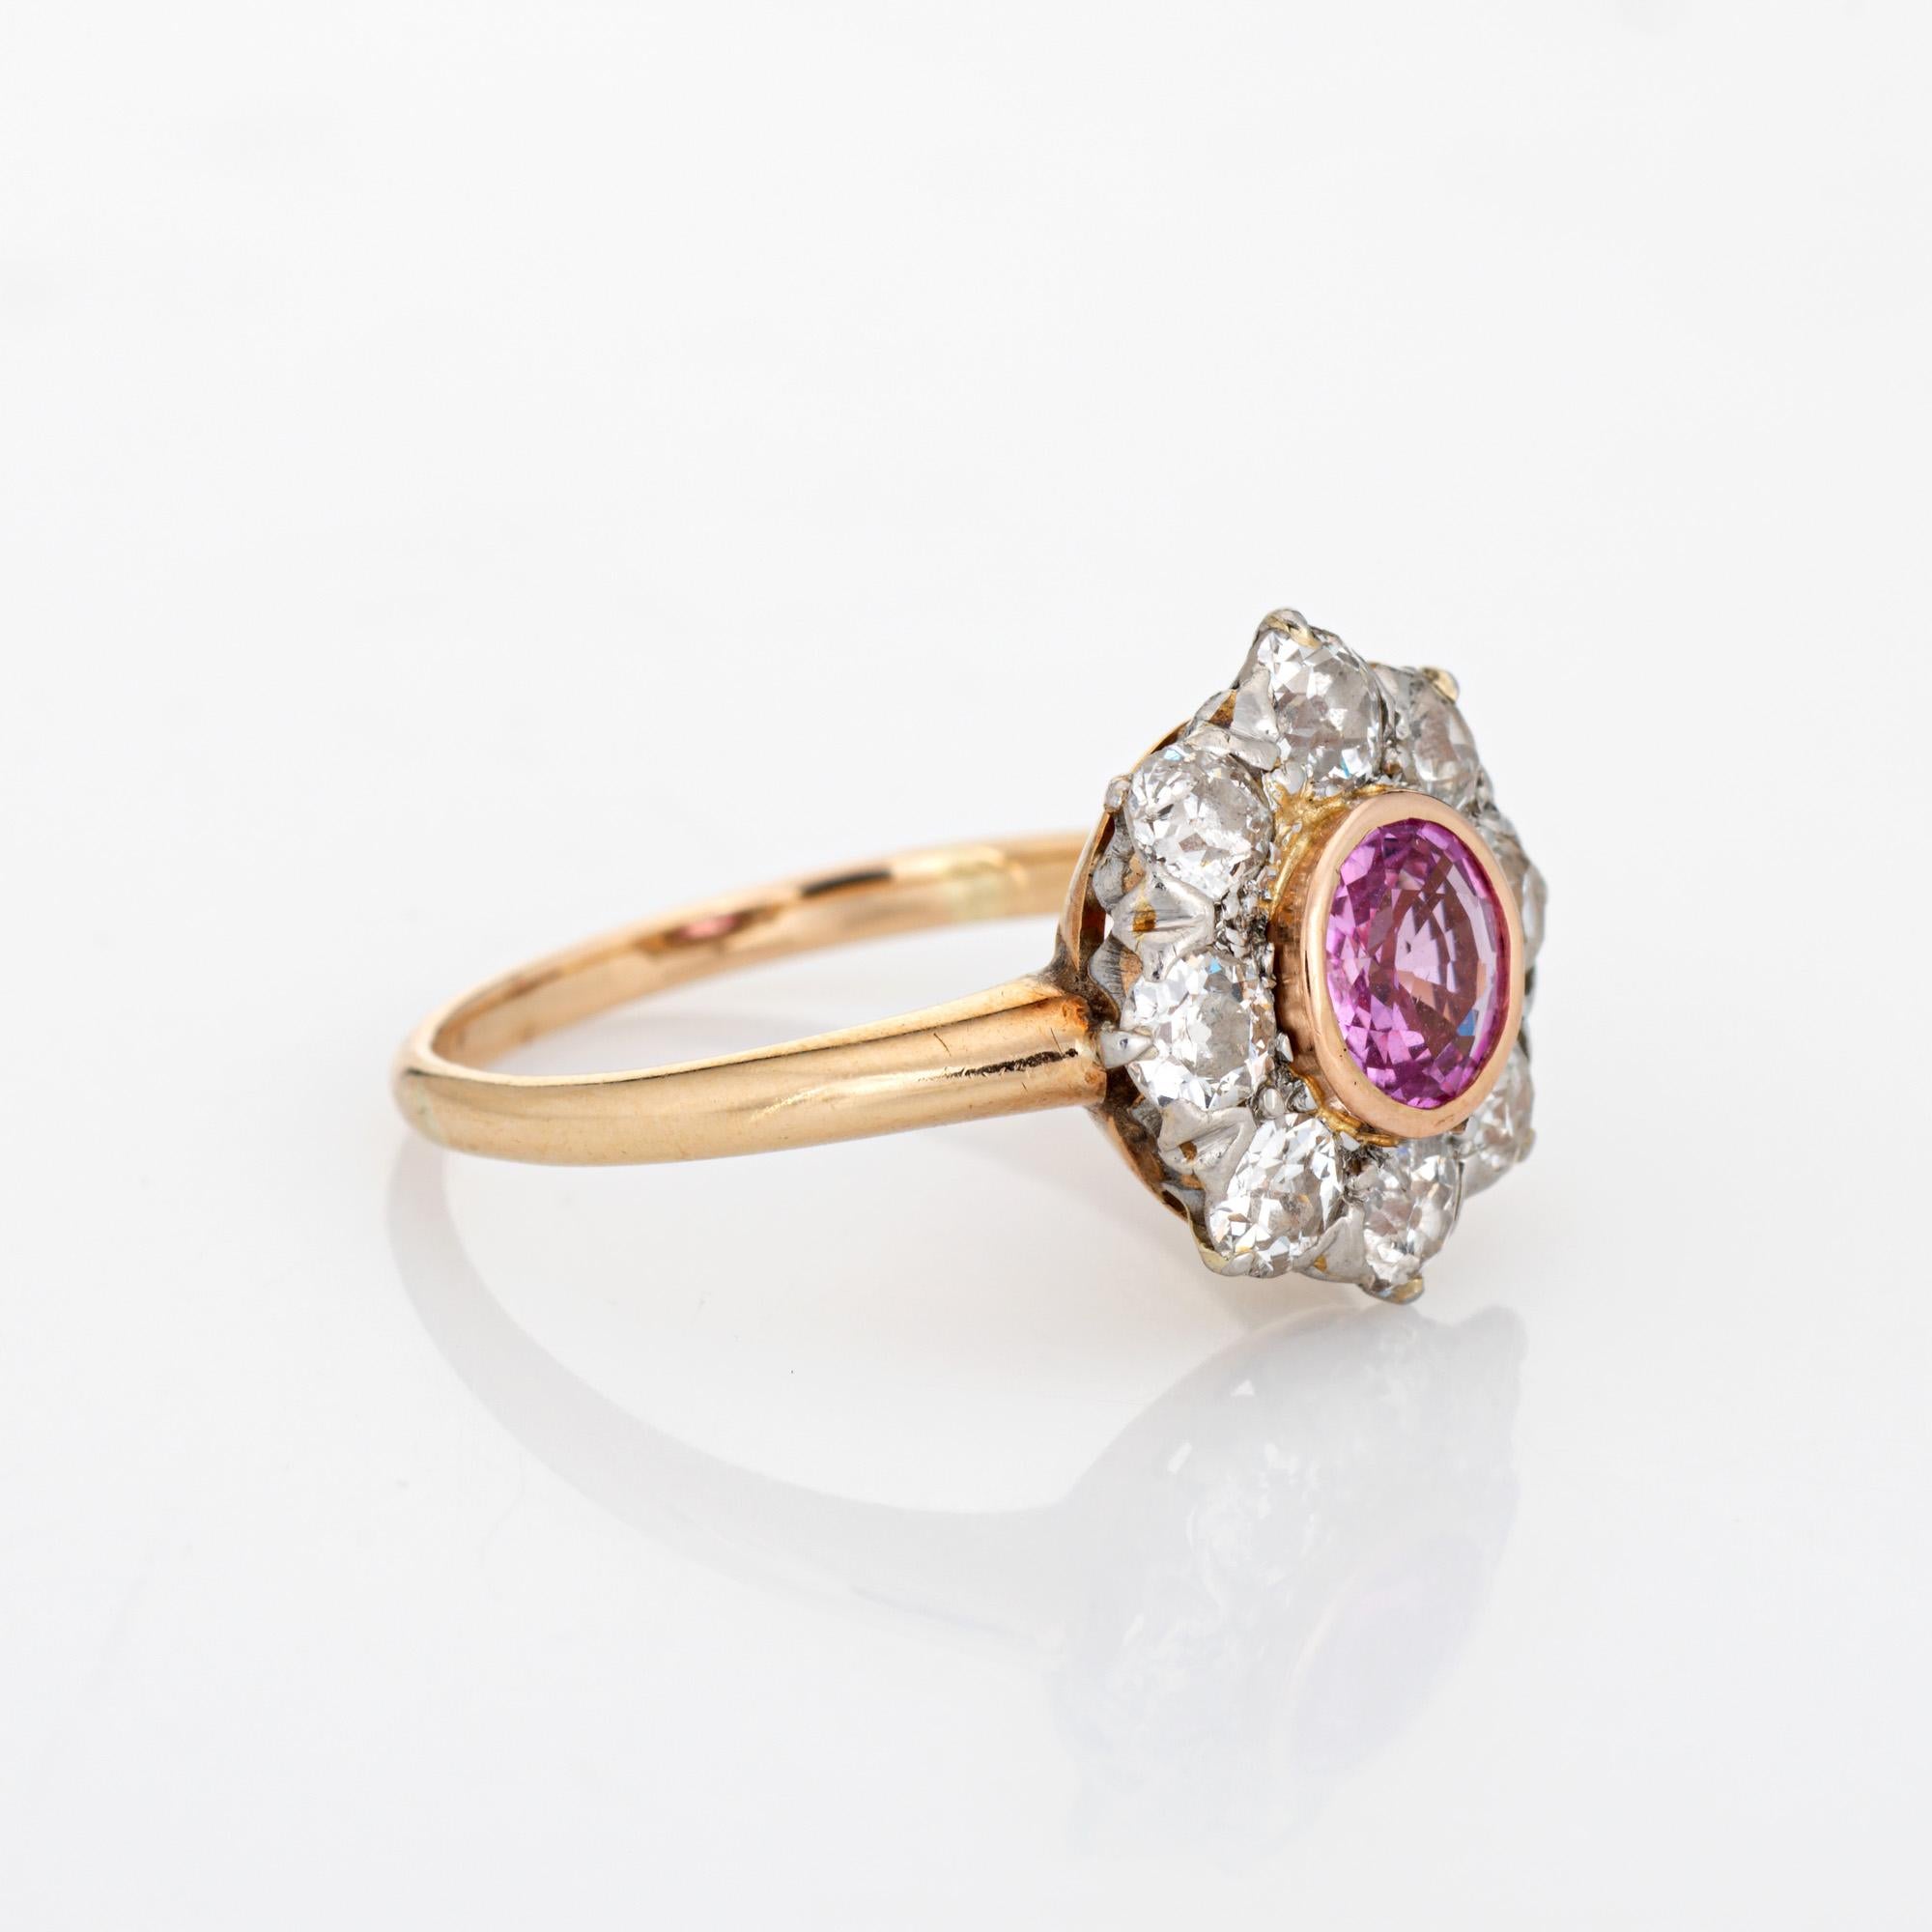 Round Cut Antique Edwardian Pink Sapphire Diamond Ring Cluster 14k Gold Engagement Bridal For Sale